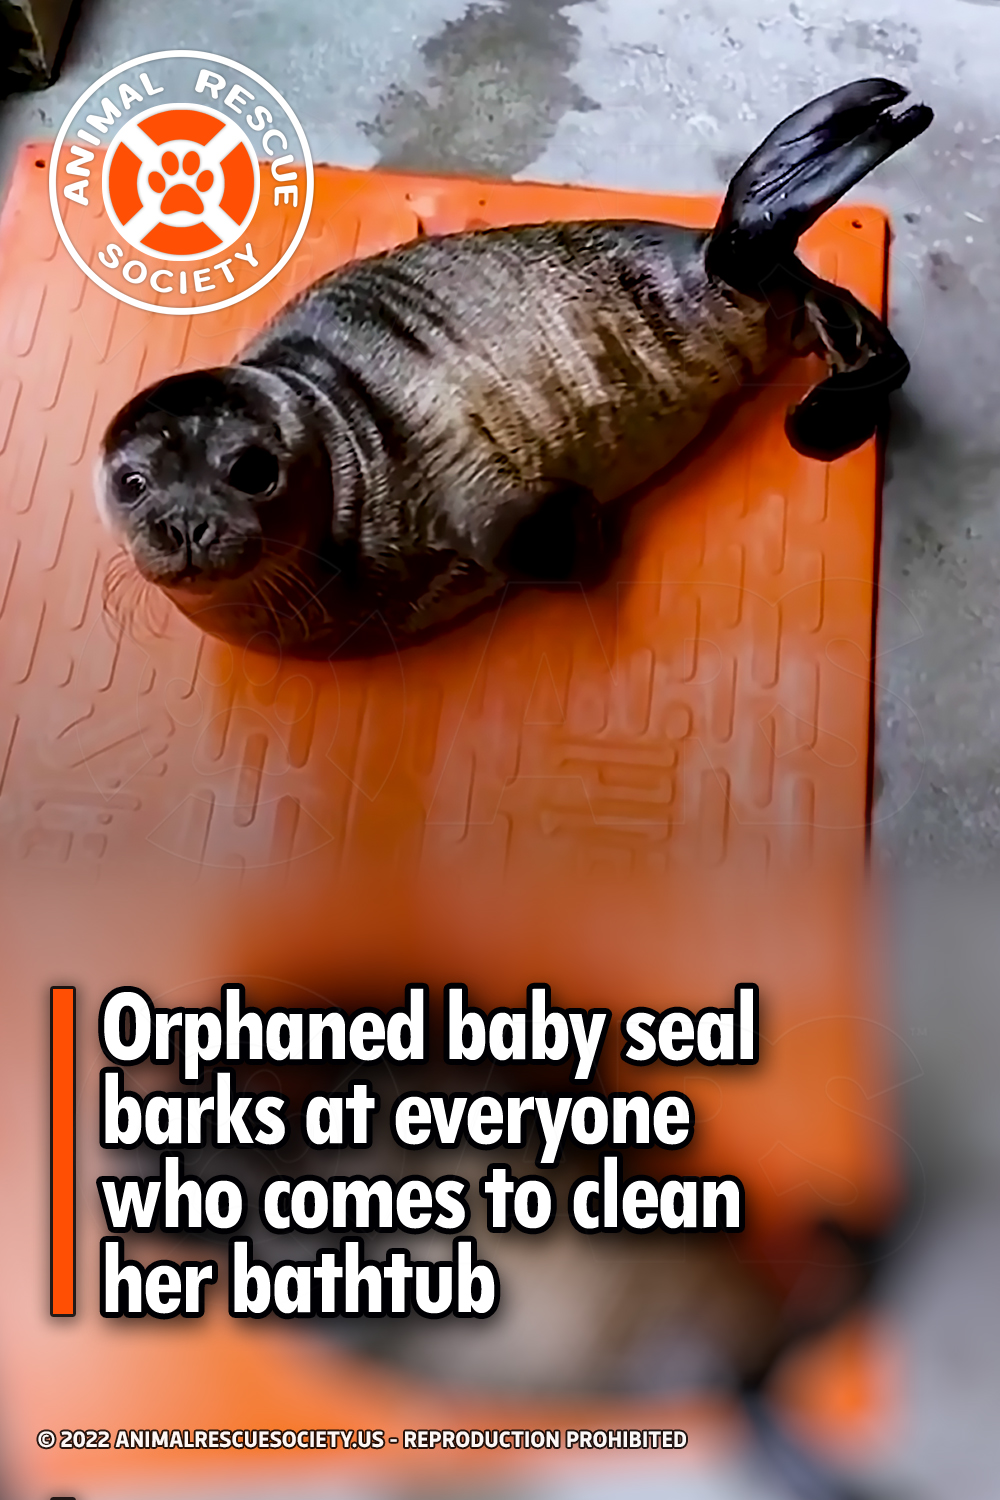 Orphaned baby seal barks at everyone who comes to clean her bathtub